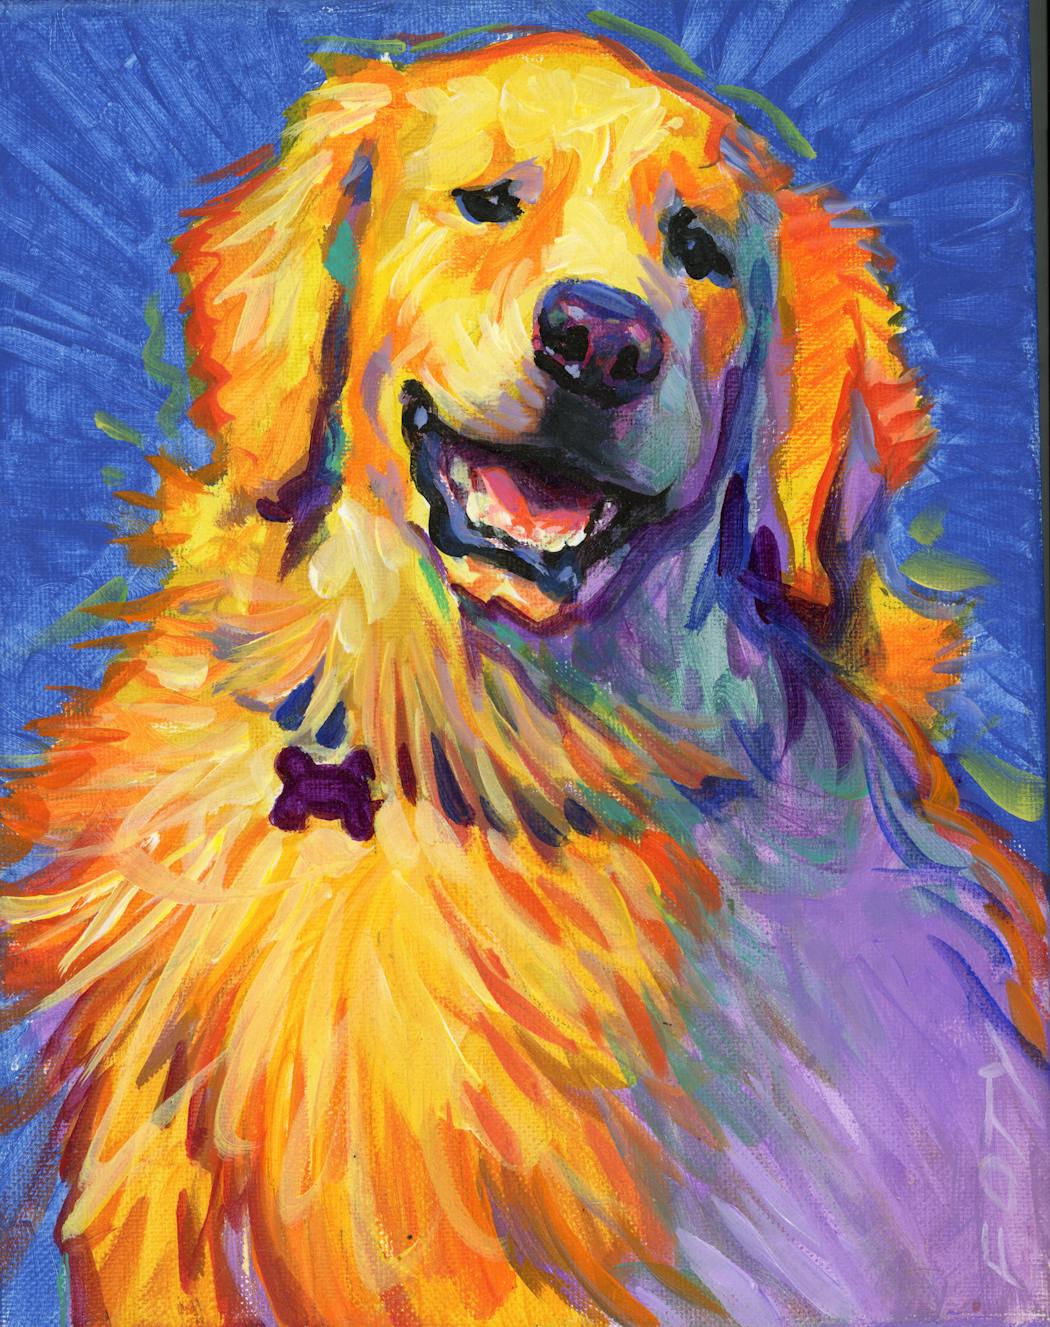 Minnetonka artist Tom Foty makes portraits of people's dogs the old-fashioned way, with paint and brush.